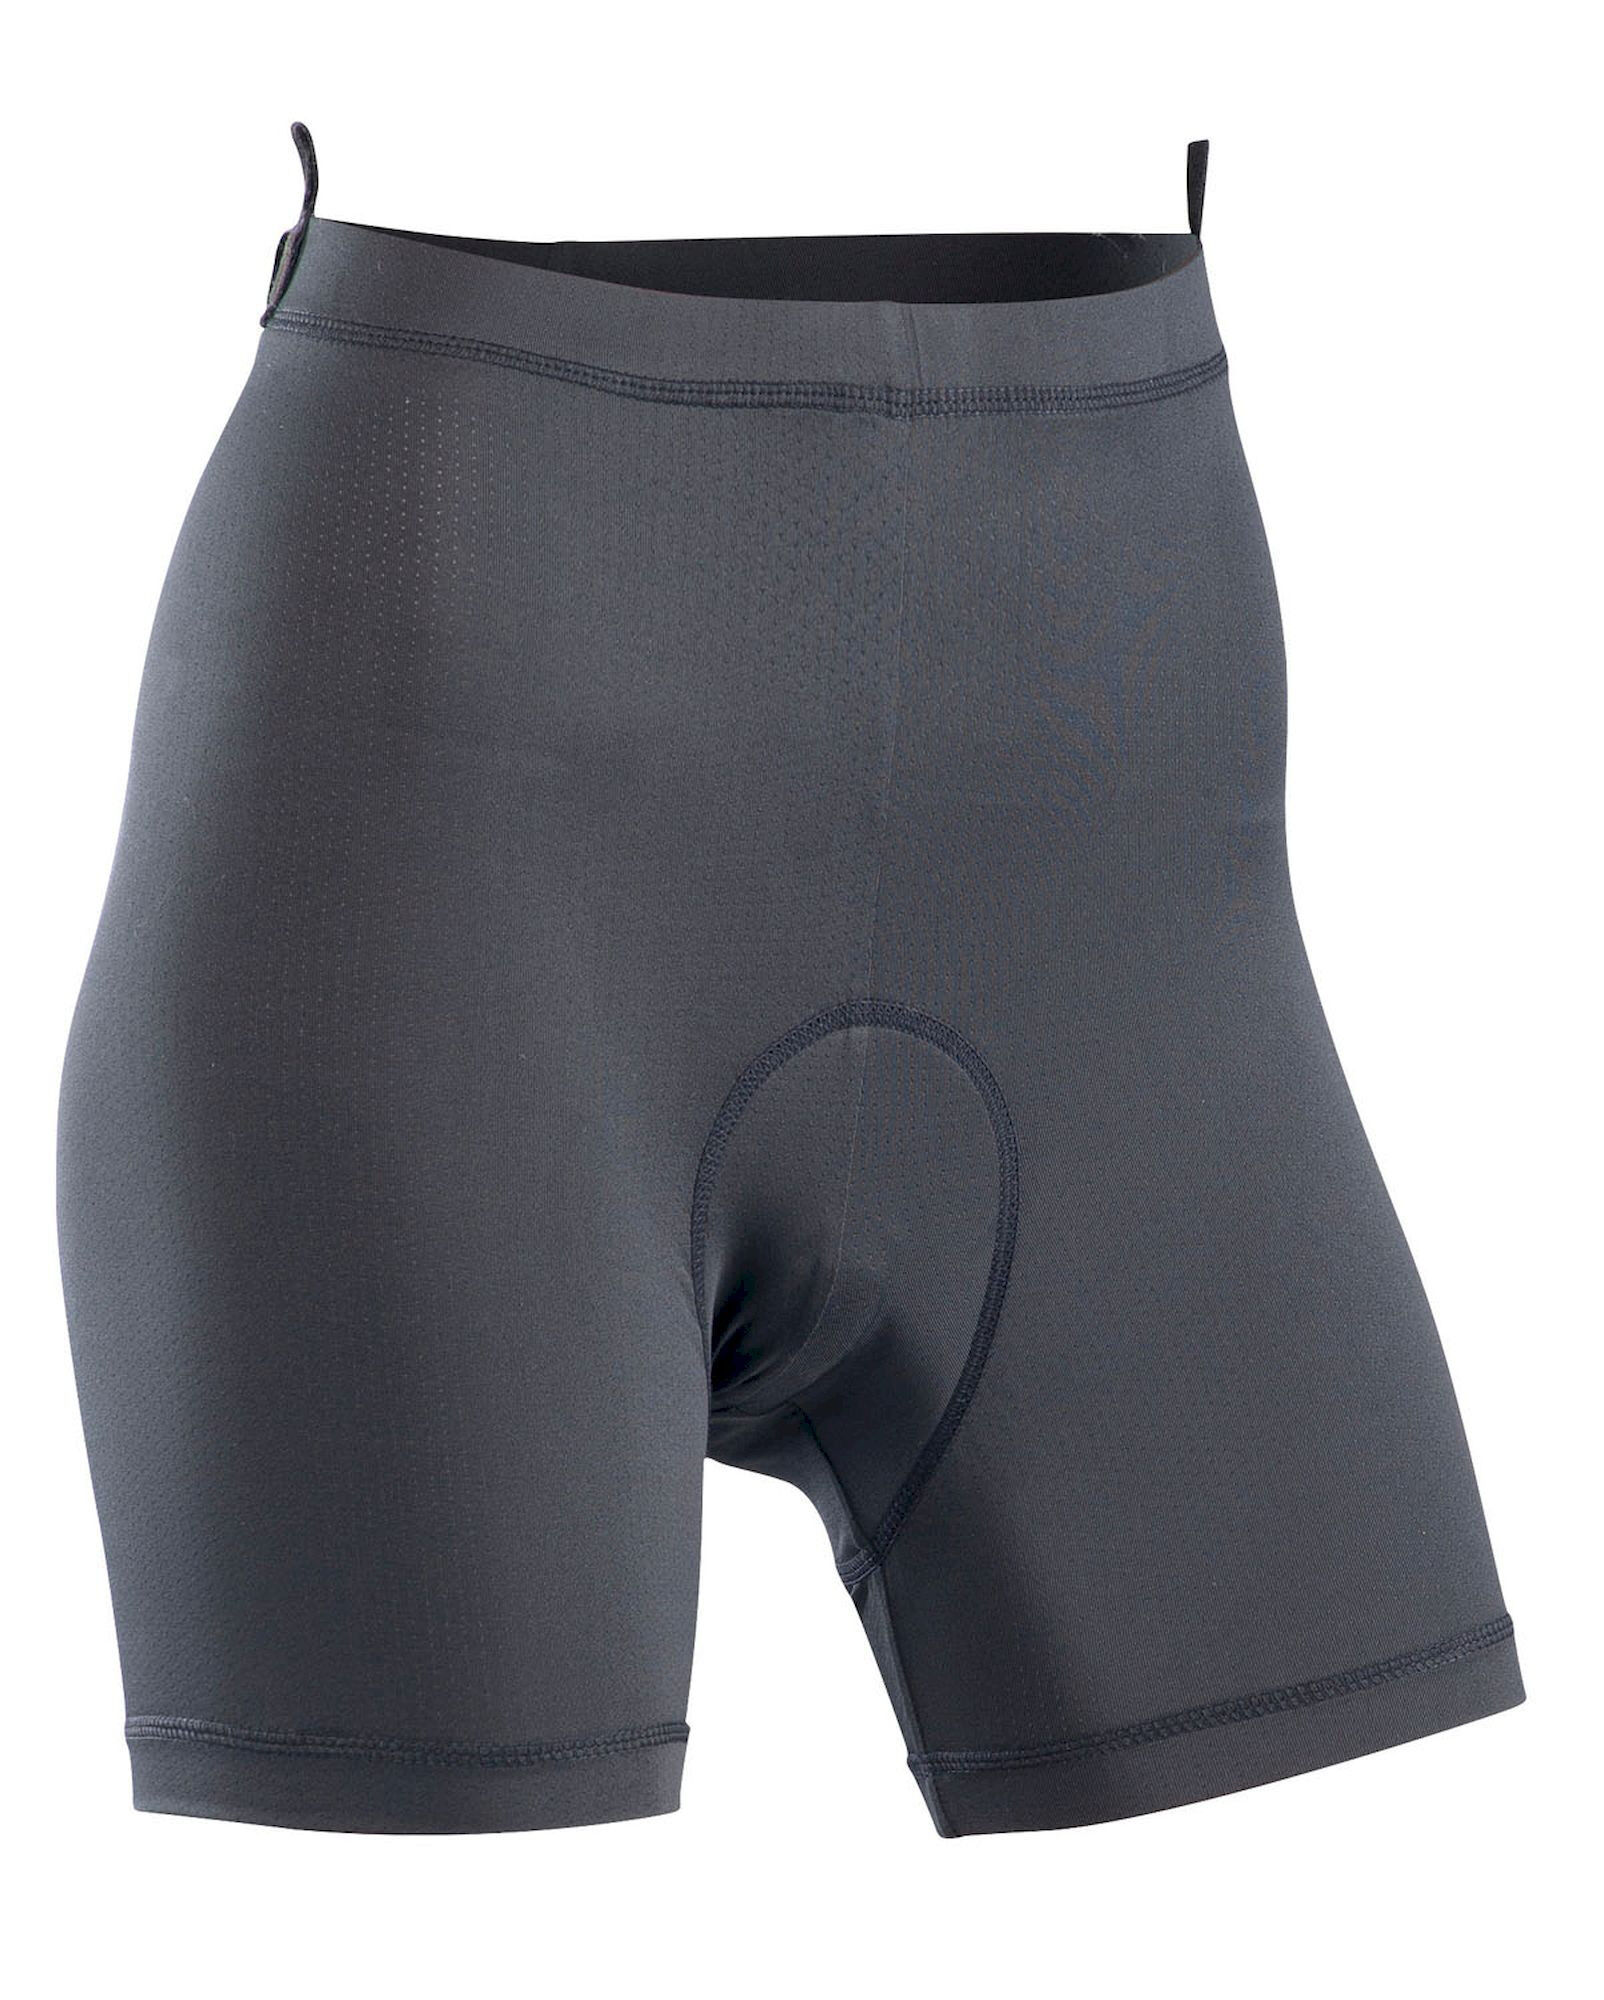 Northwave Pro Woman Inner Short - Ropa interior ciclismo - Mujer | Hardloop